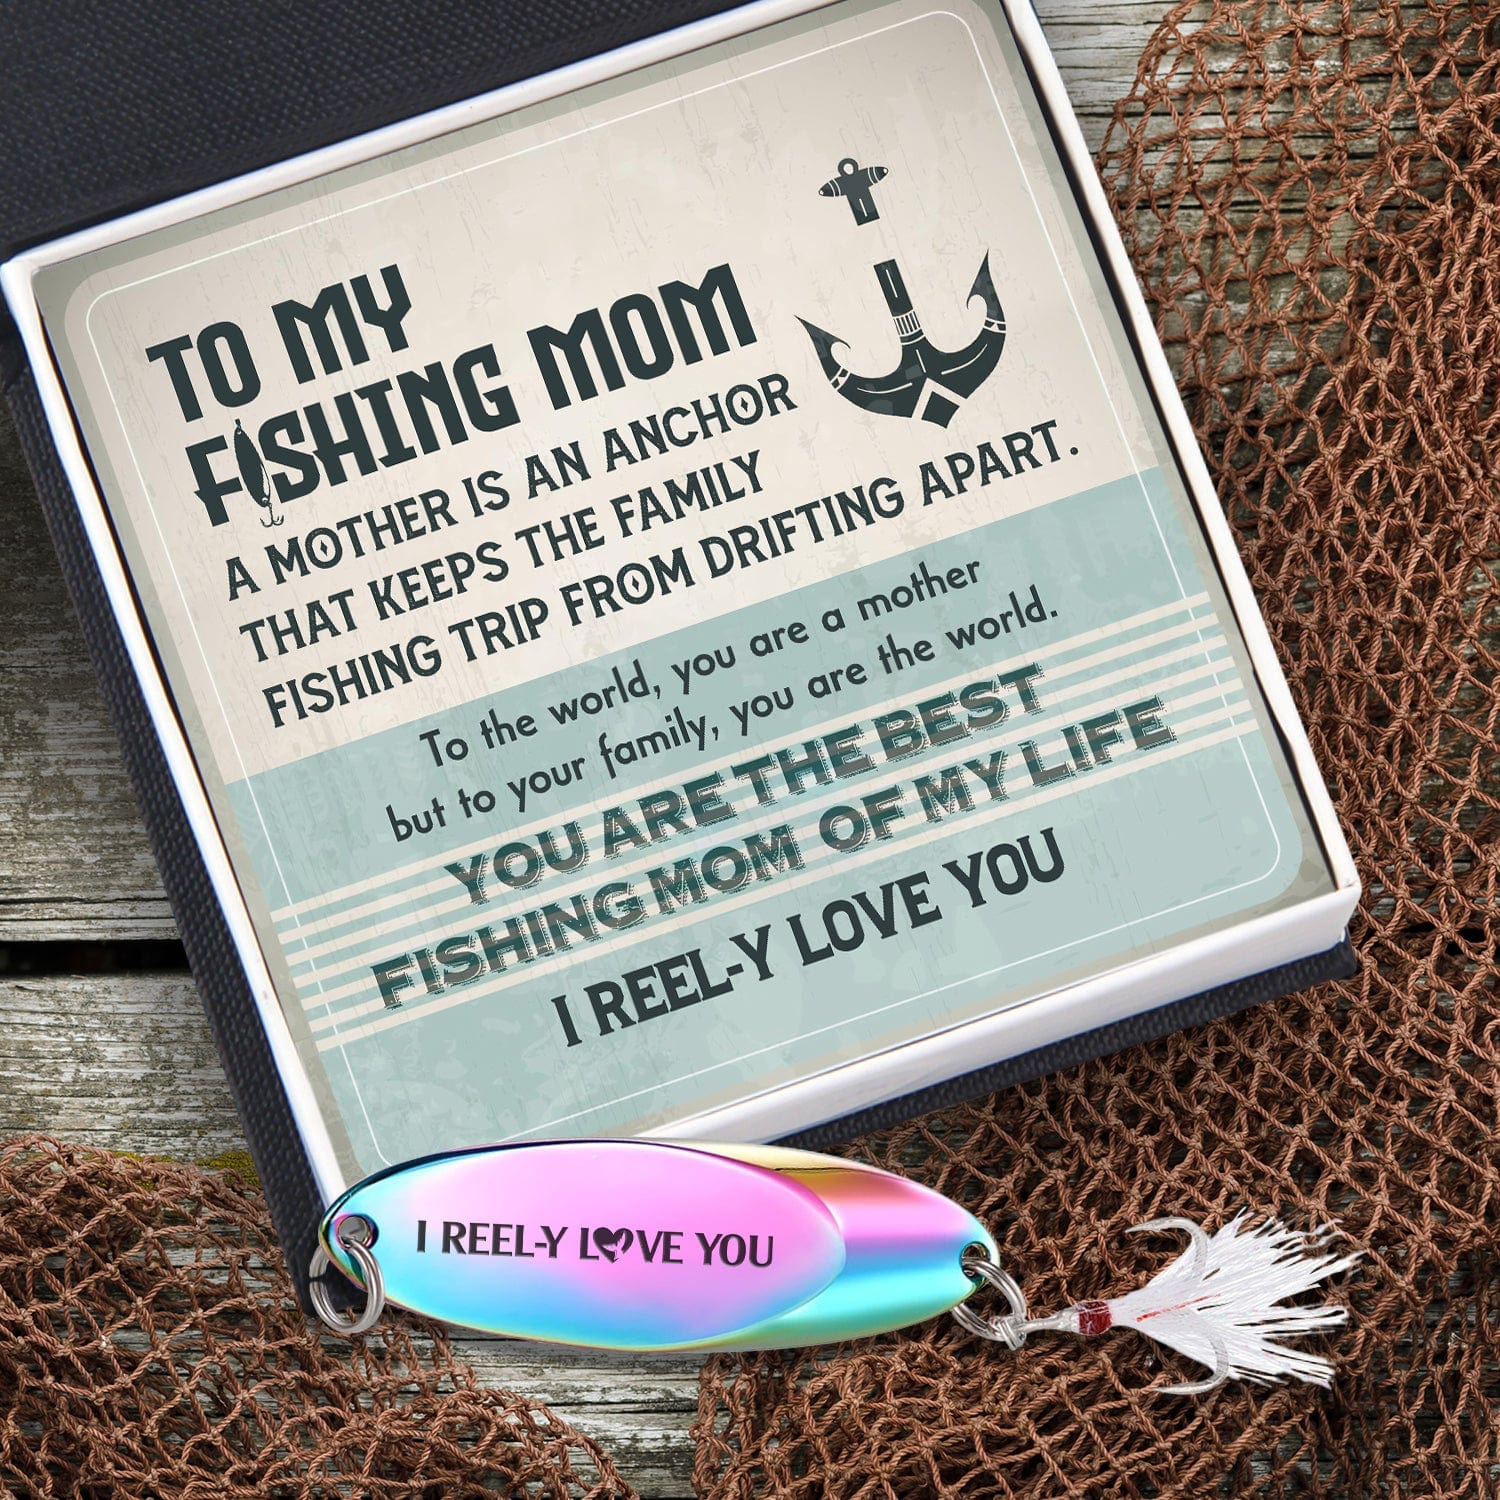 Sequin Fishing Bait - Fishing - To My Fishing Mom - You Are The Best Fishing Mom - Gfab19001